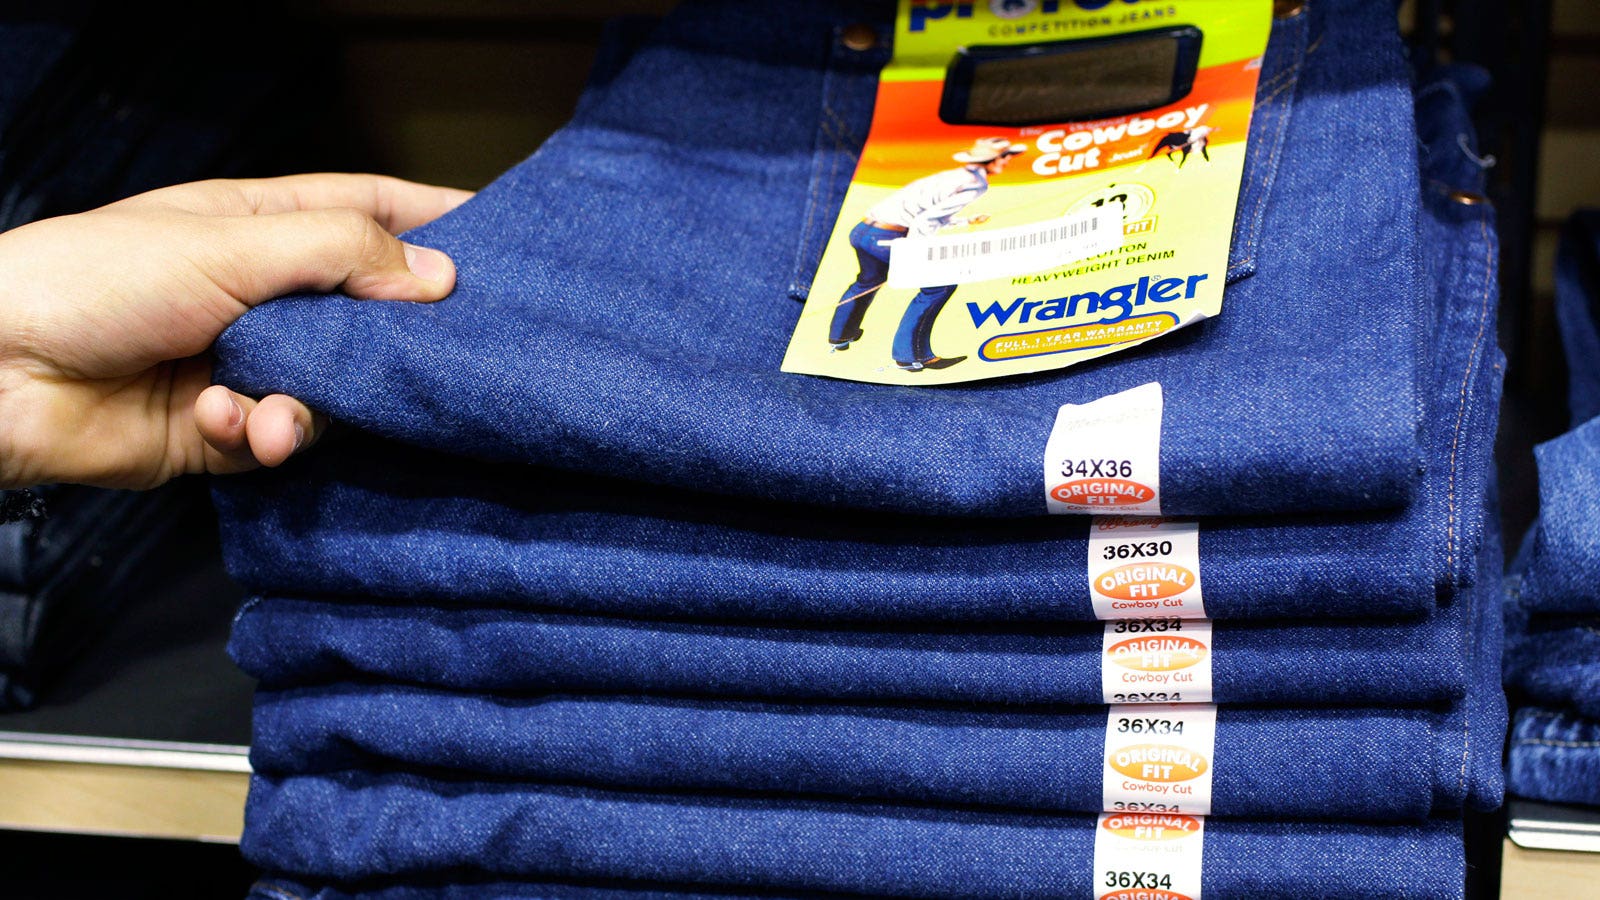 Levi's or Wranglers: Which jeans do Republicans and Democrats